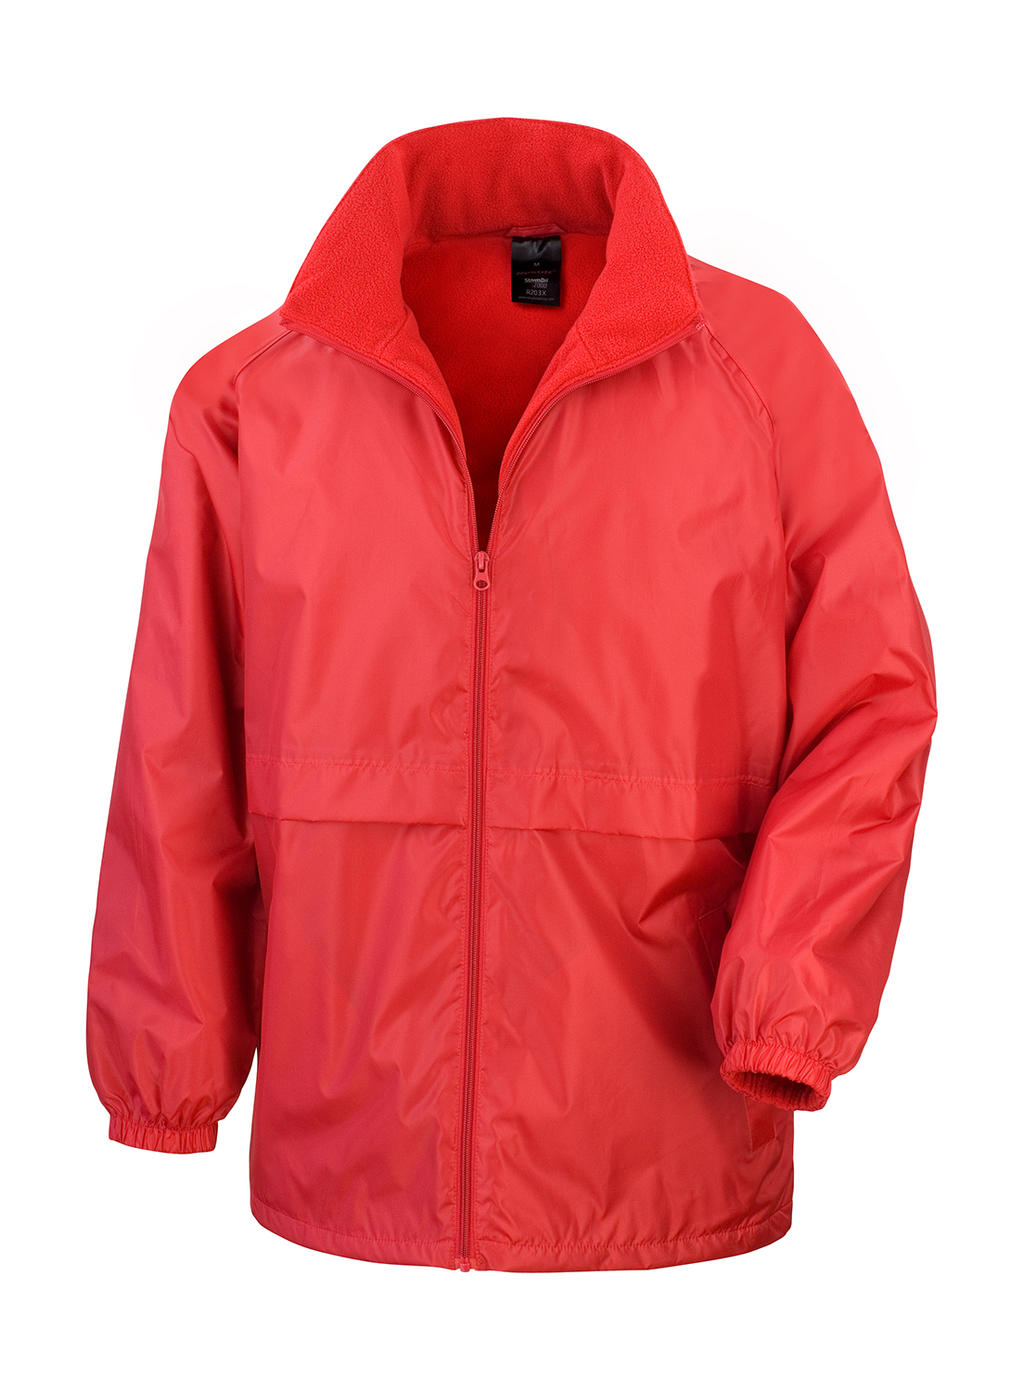  Microfleece Lined Jacket in Farbe Red